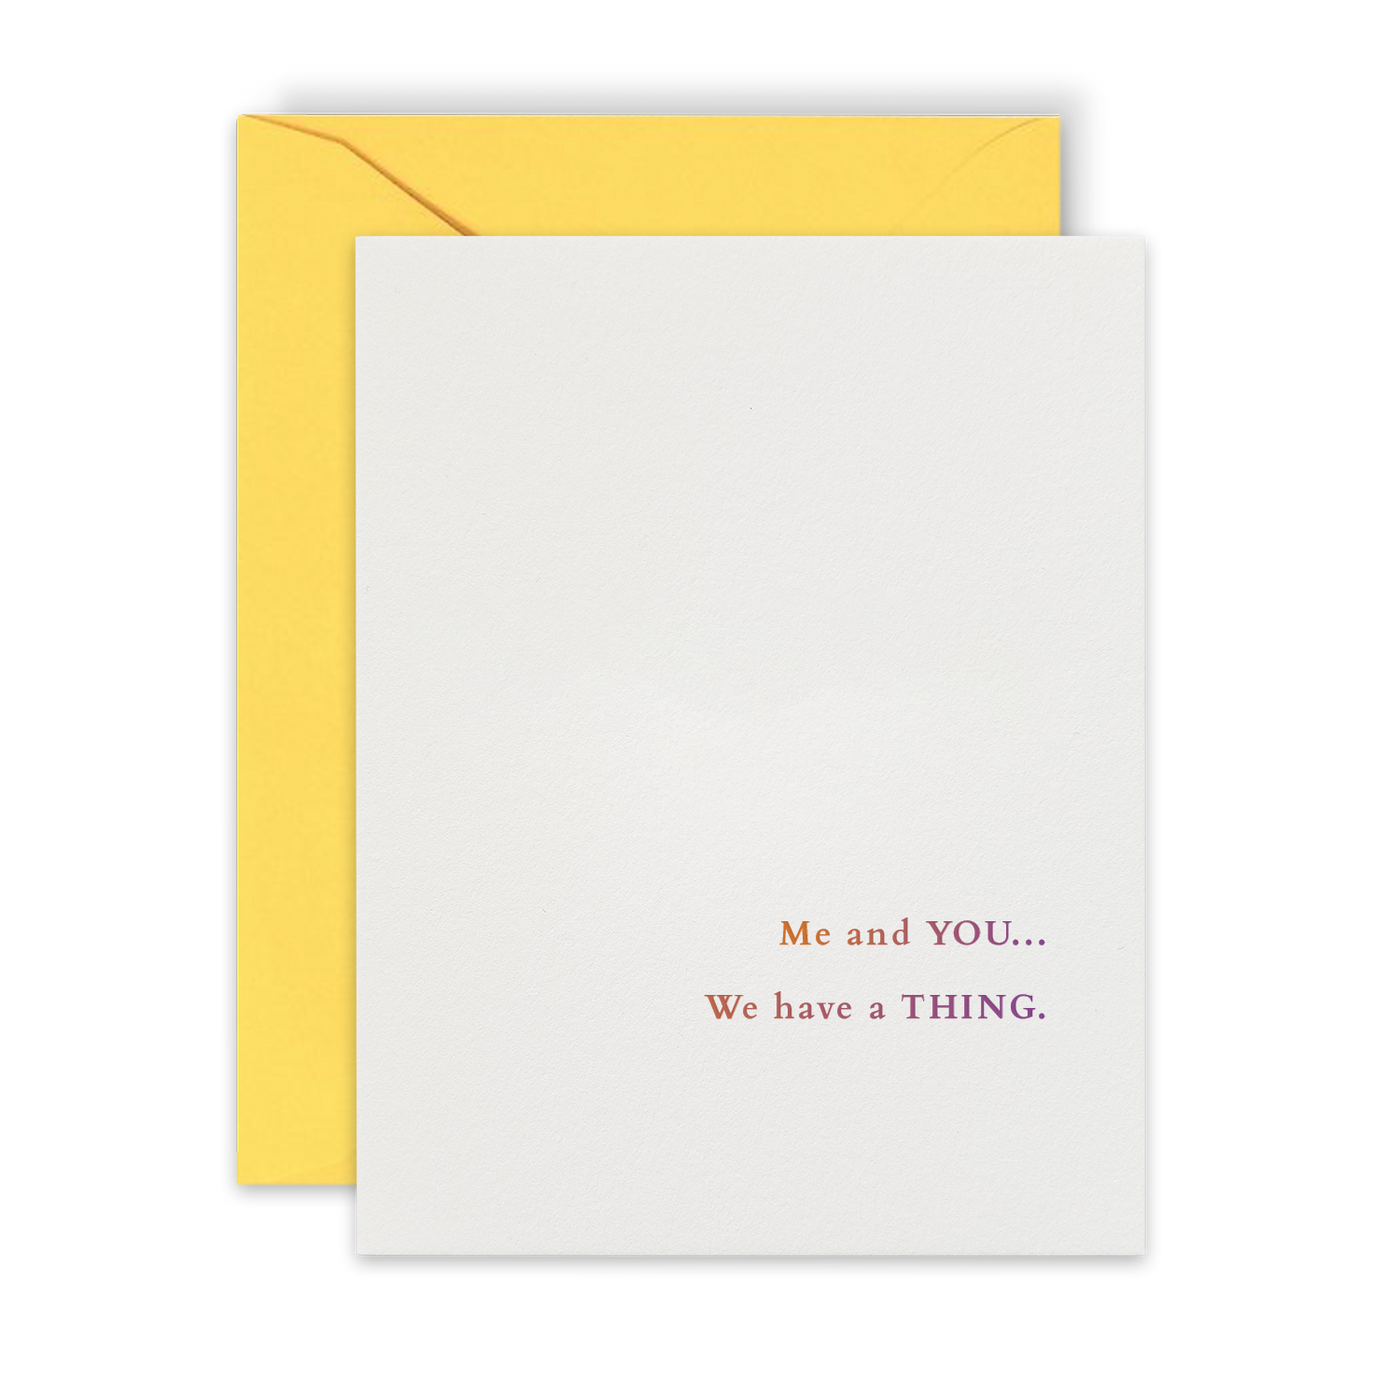 Ómbre printed front of greeting card by beknown. Me and you...We have a thing.